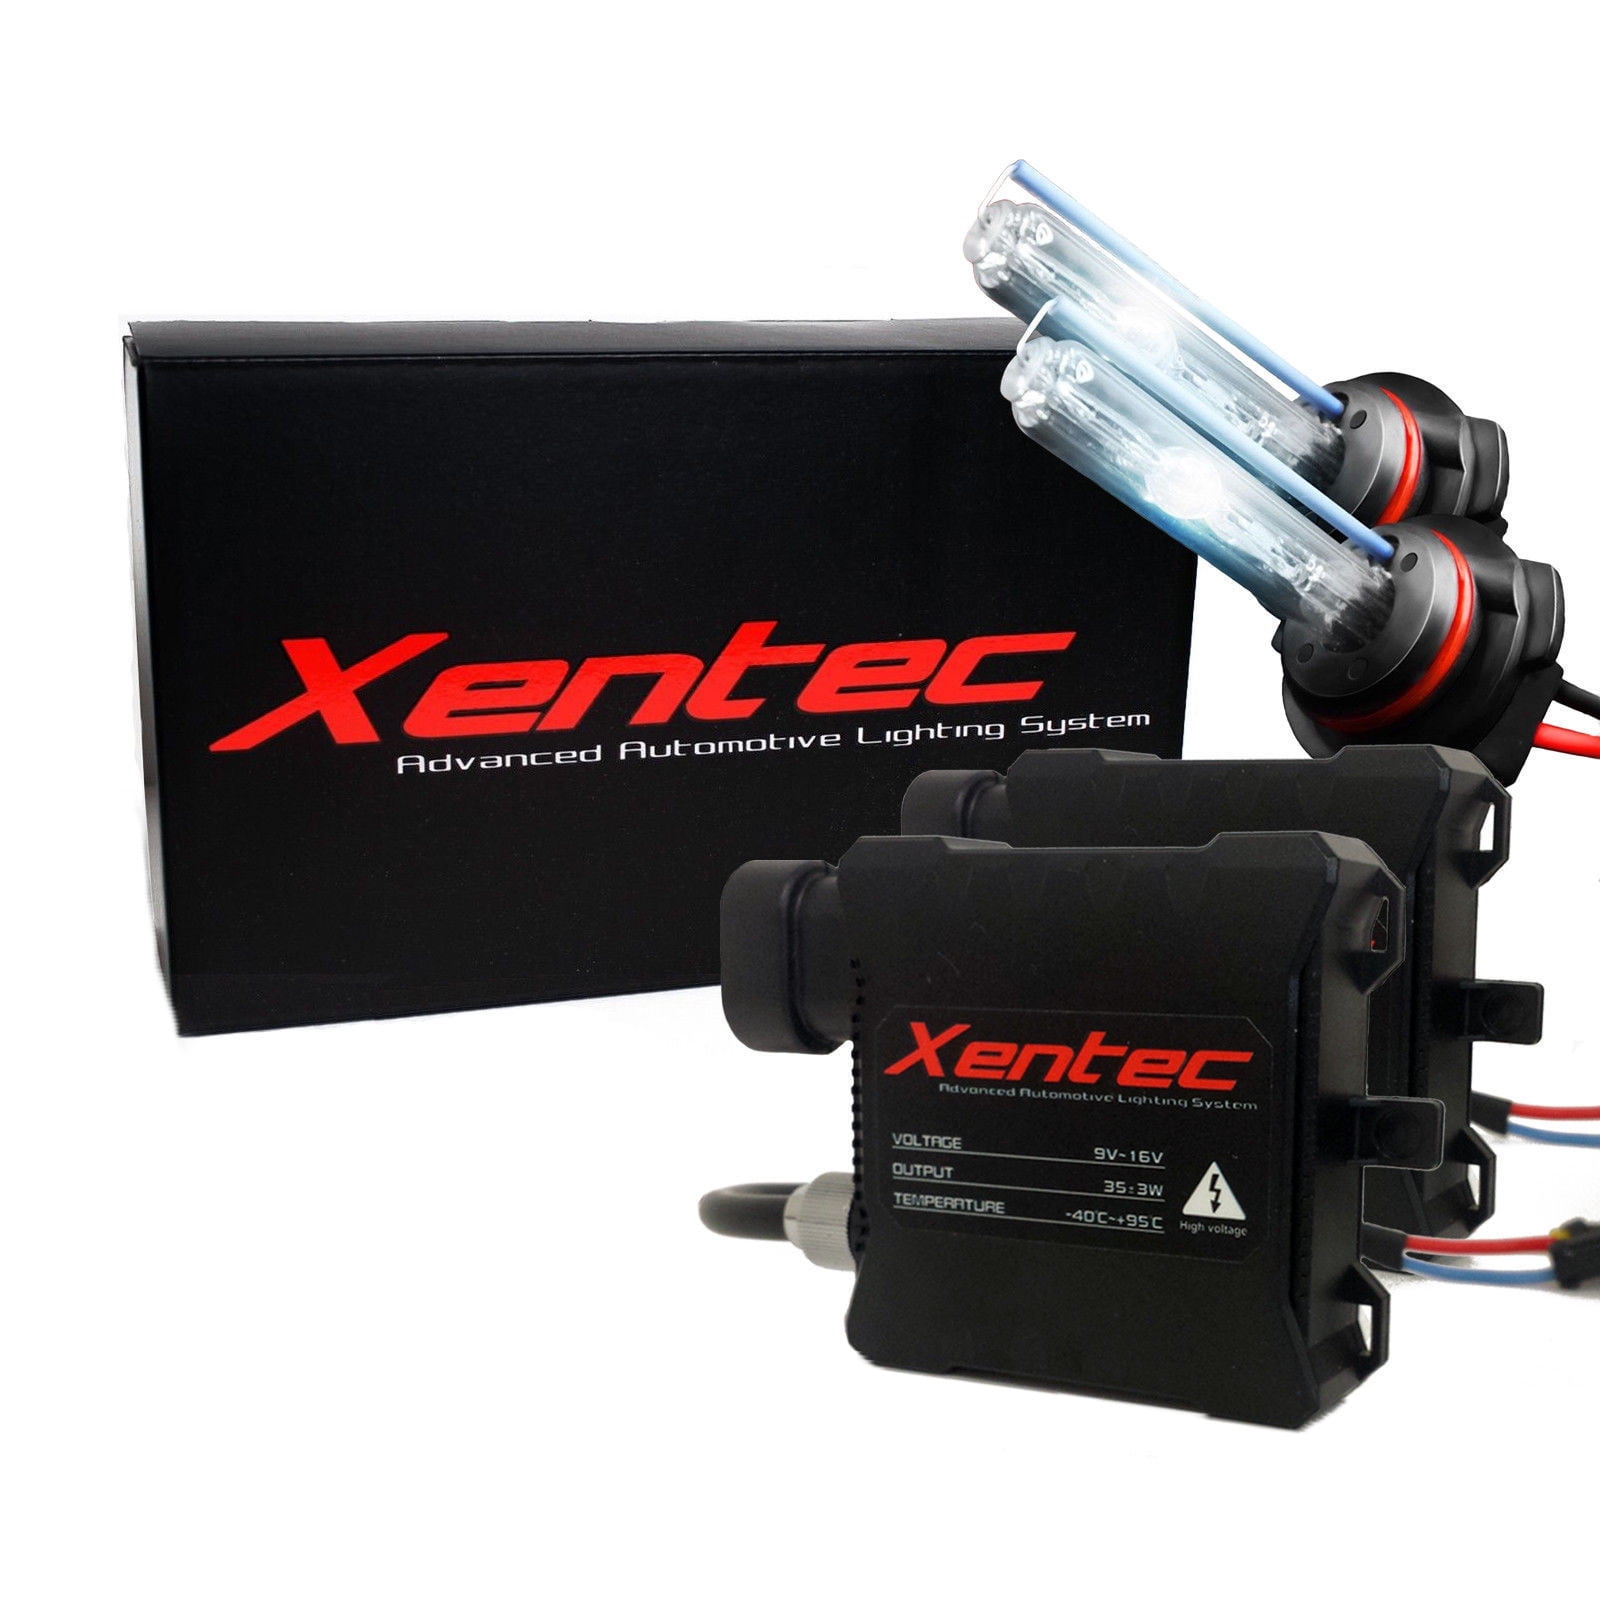 Xentec HID Kit Xenon Light H11 9005 9006 H4 for 1990-2017 Toyota Camry 